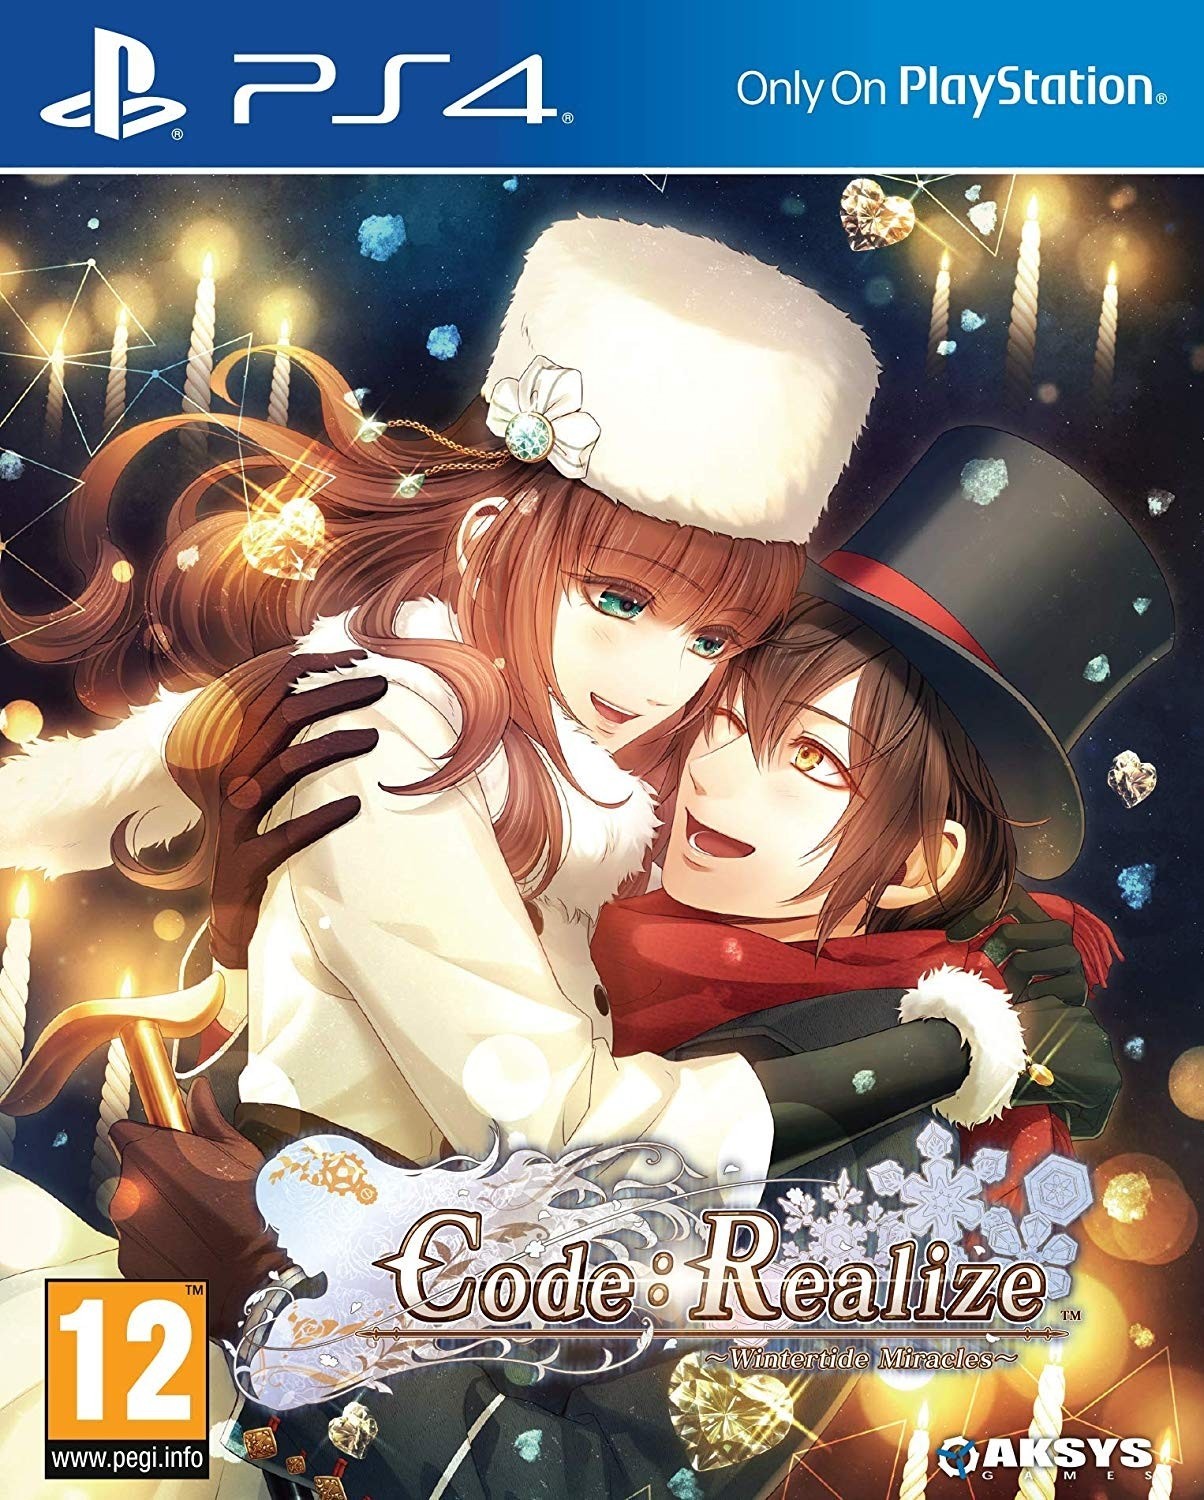 Code: Realize Wintertide Miracles (PS4), Aksys Games